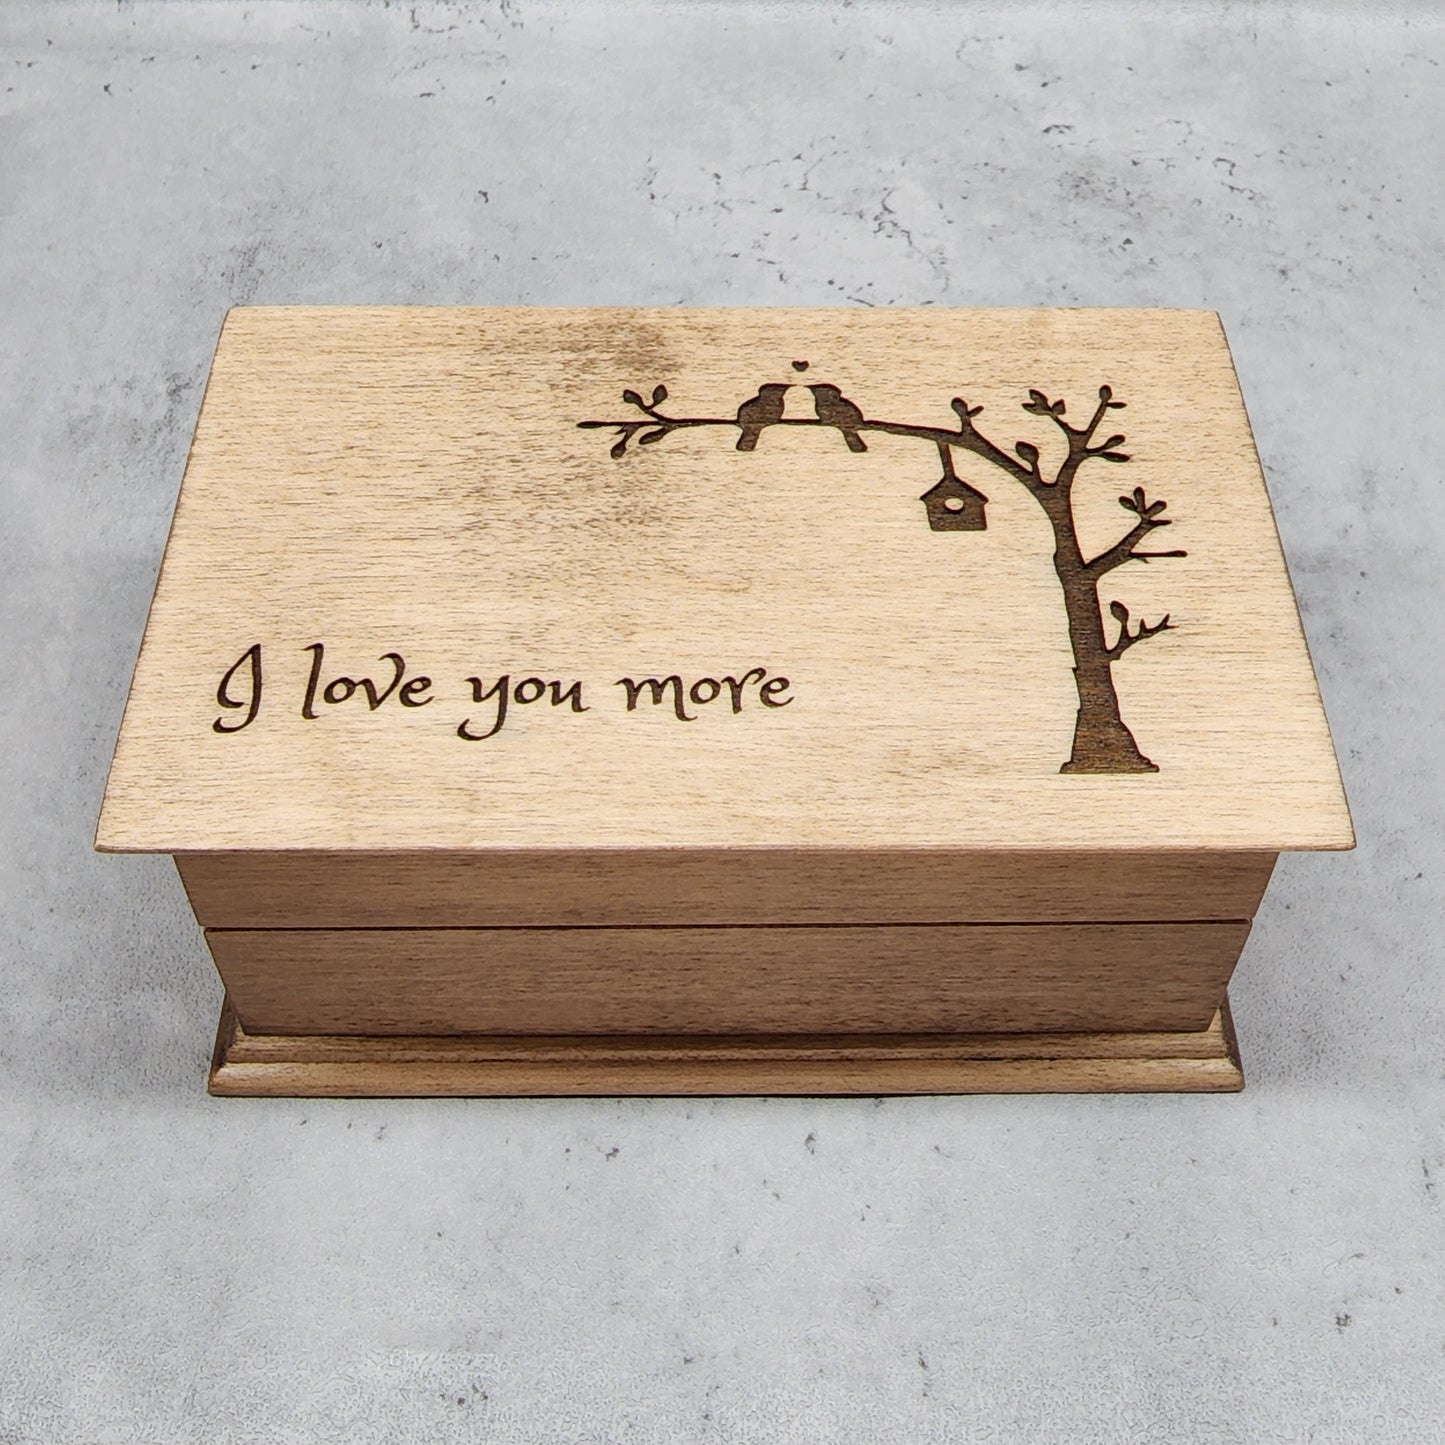 Love birds jewelry box with I love you more which plays music of your choice, music box shop, music box by Simplycoolgifts